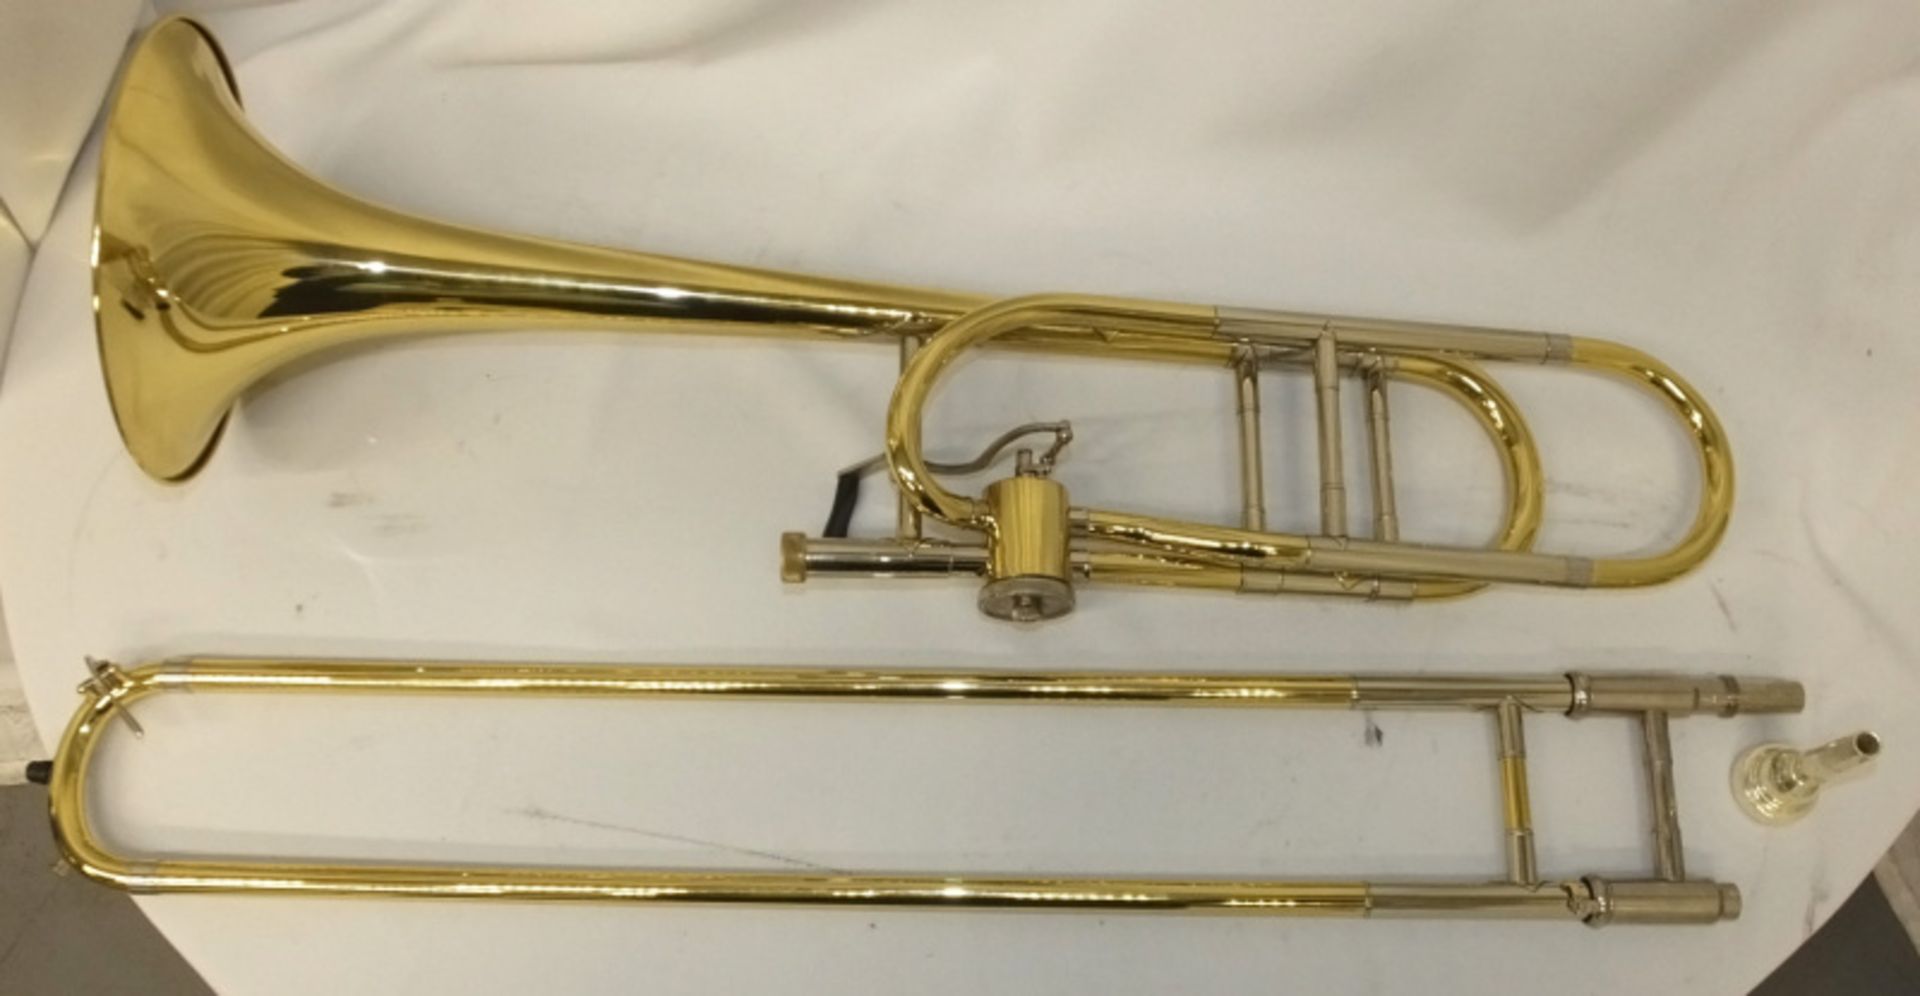 Gear 4 Music Trombone in case - Please check photos carefully - Image 2 of 11